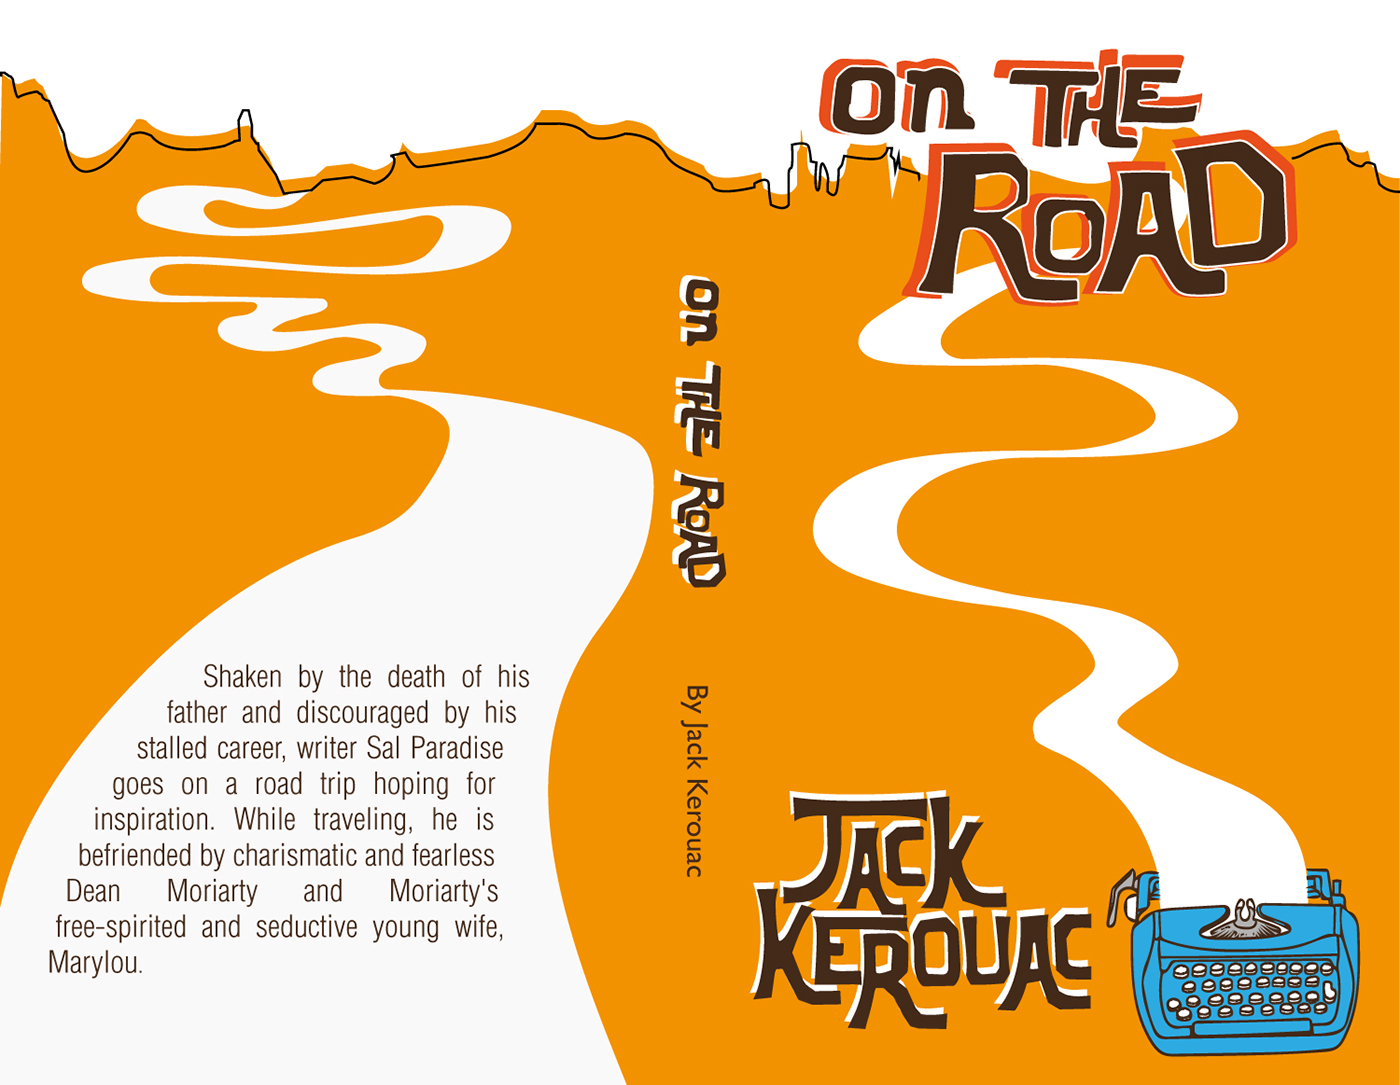 On the road by Jack Kerouac book cover